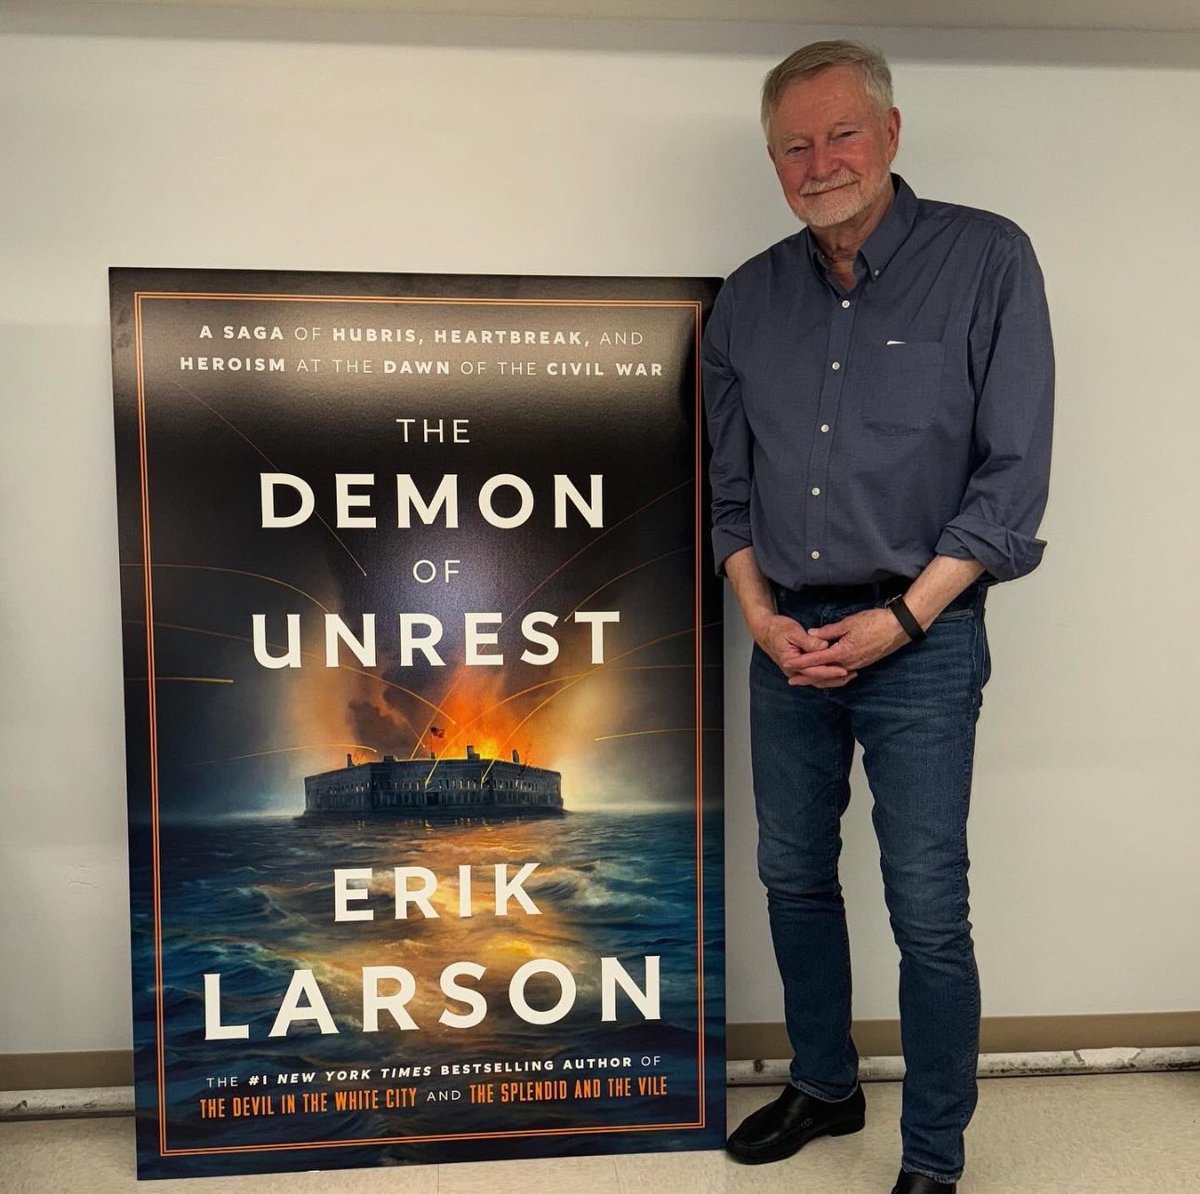 A massive THANK YOU to @exlarson for stopping by to sign his works, as well as copies of his upcoming book, “THE DEMON OF UNREST” — out NOW!!!
.
.
.
#eriklarson #historian #demonofunrest #civilwar #civilwarhistory #bookrecommendations #booksellers #booklovers